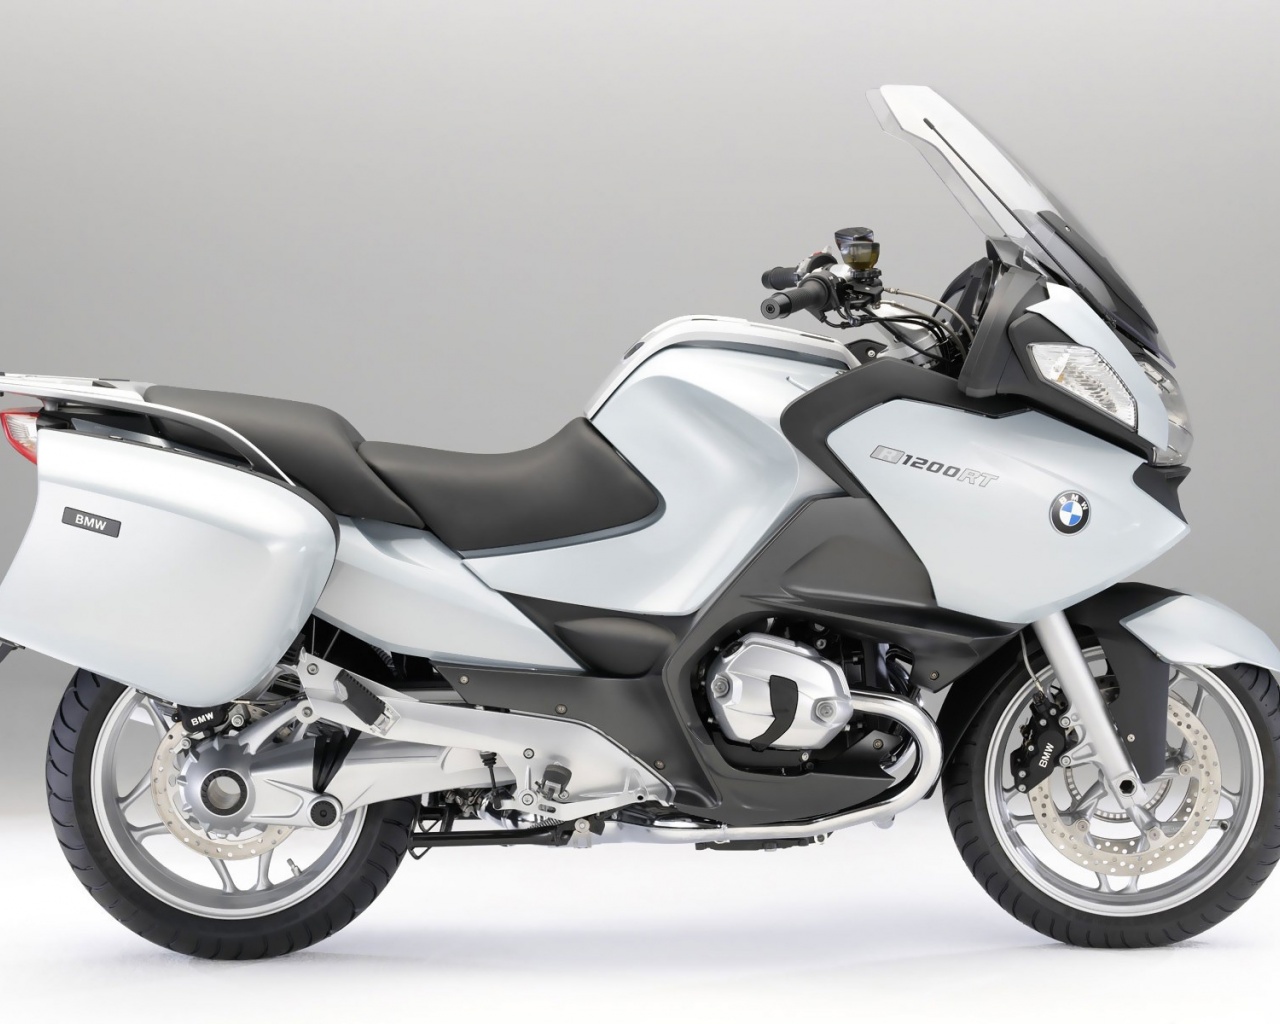 Bmw R1200rt Motorcycles